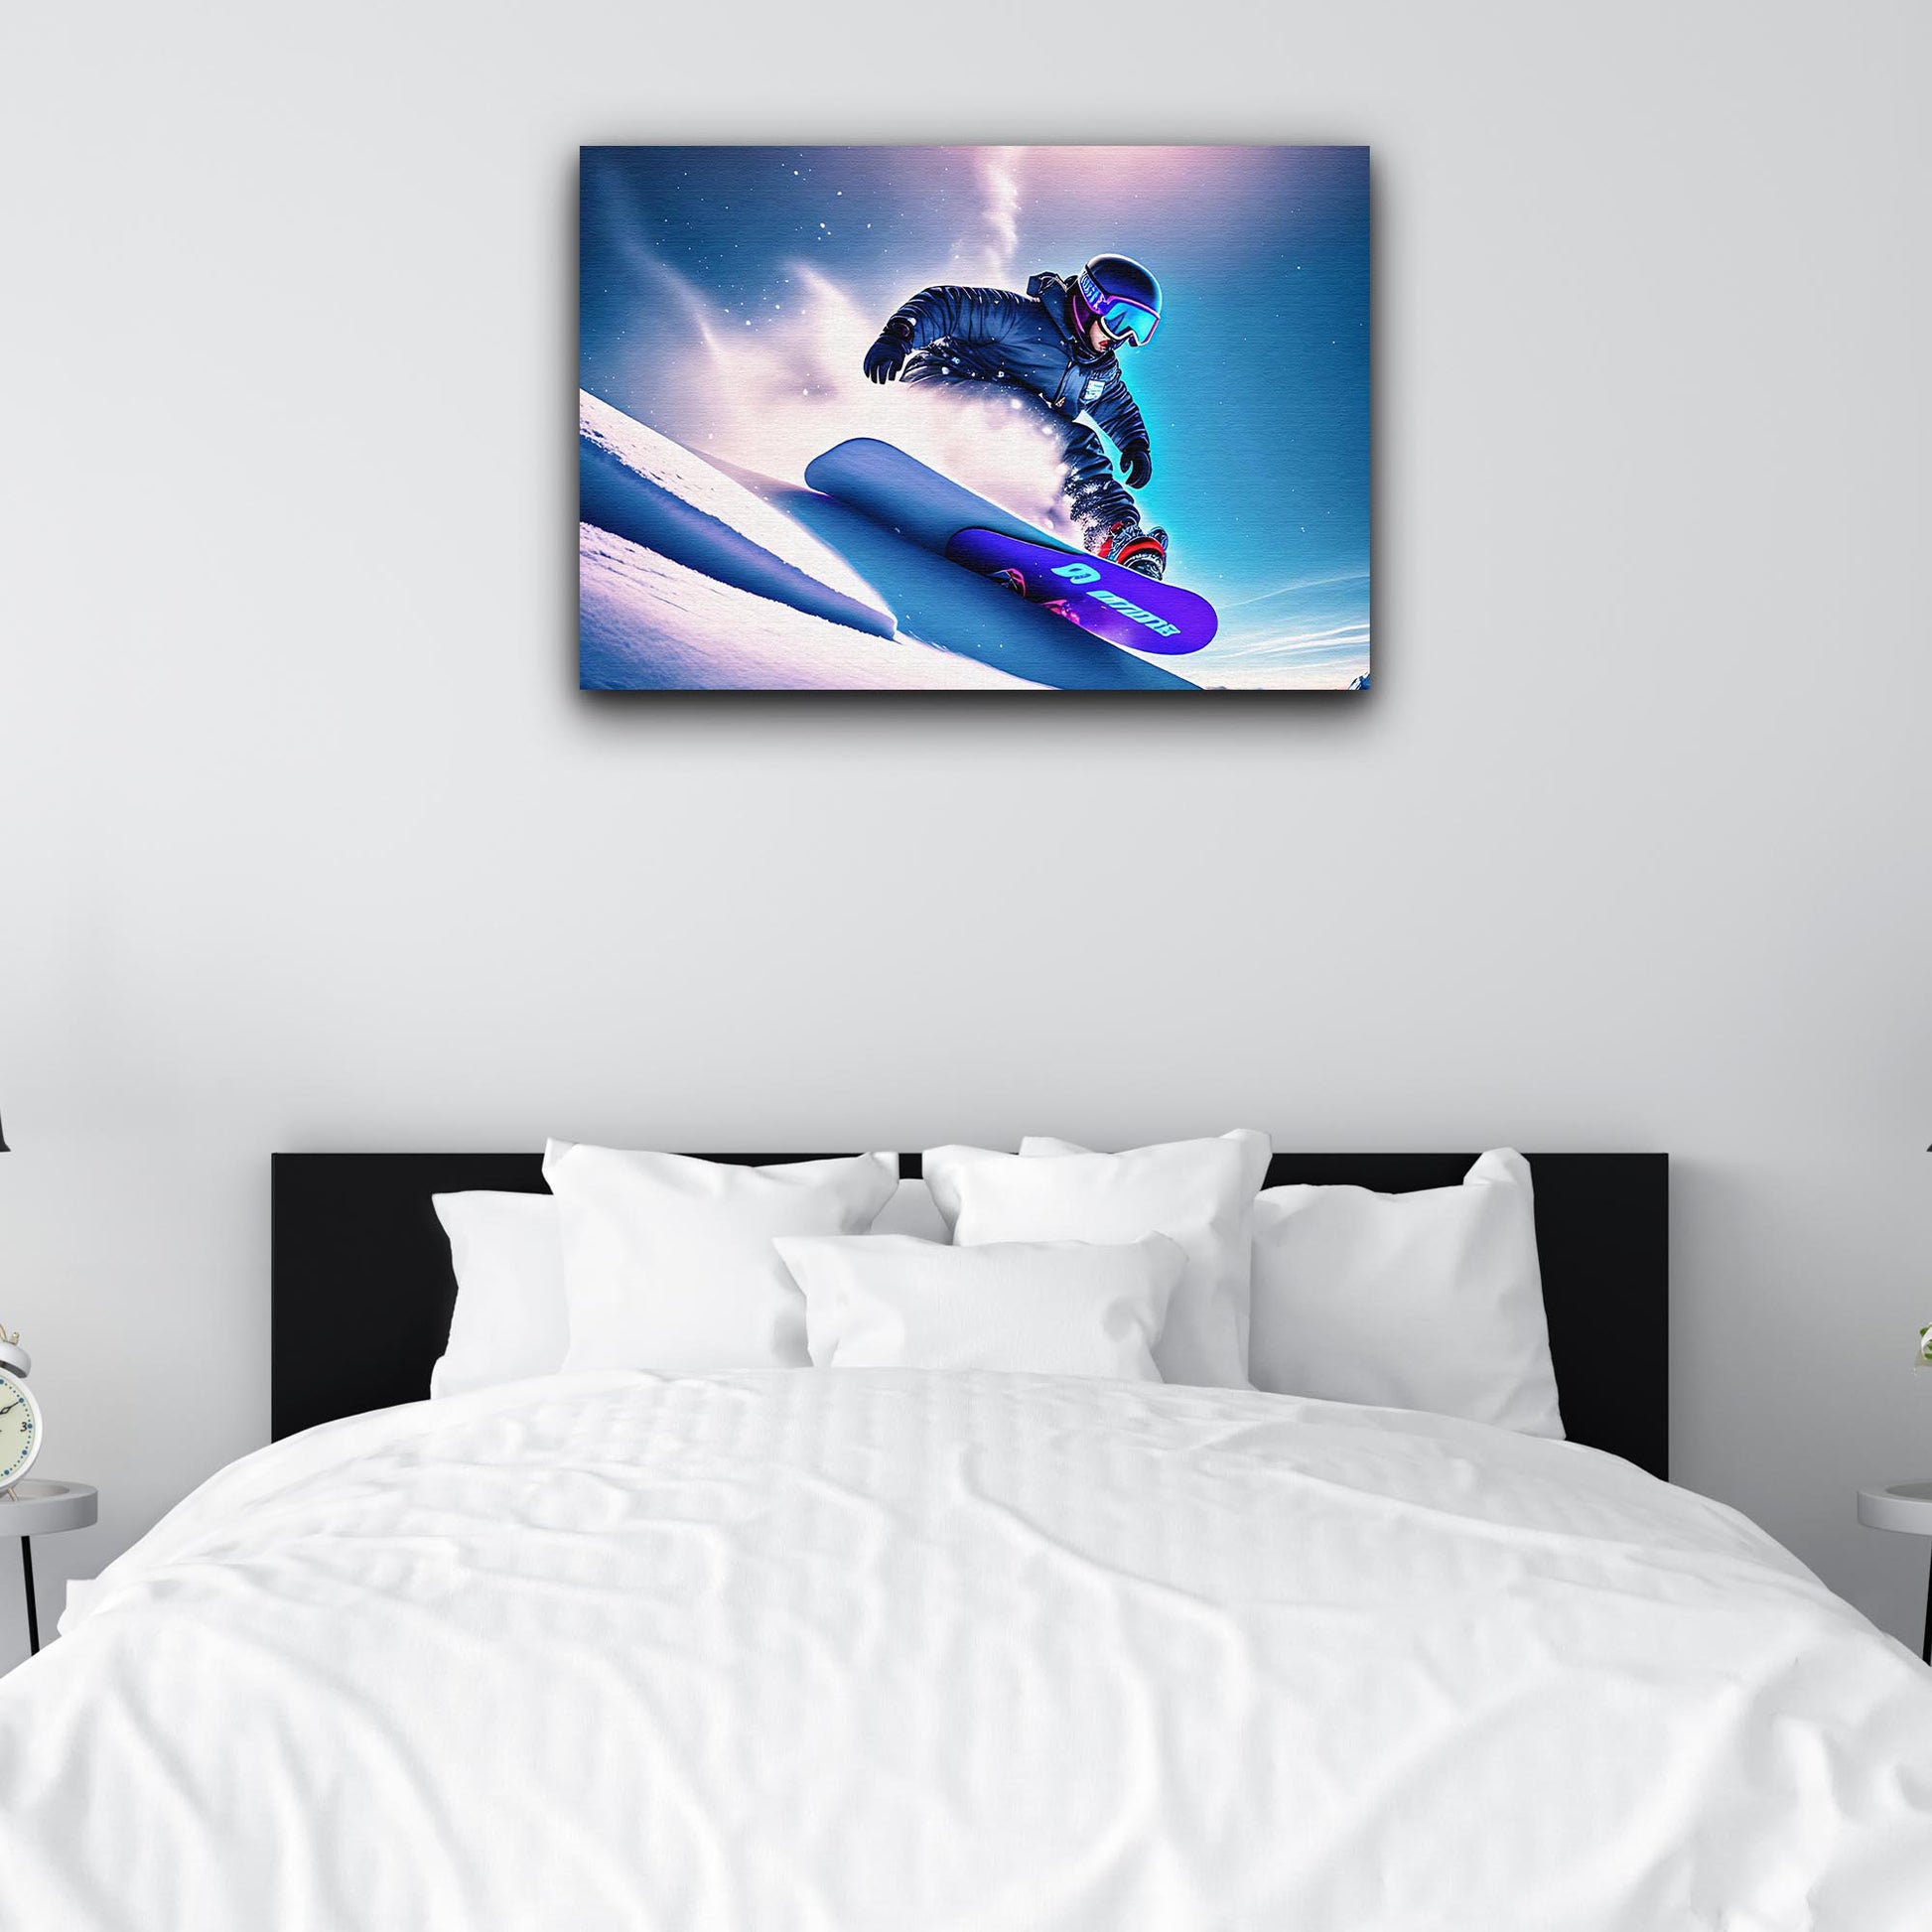 Snowboarding Downhill Canvas Wall Art Style 1 - Image by Tailored Canvases